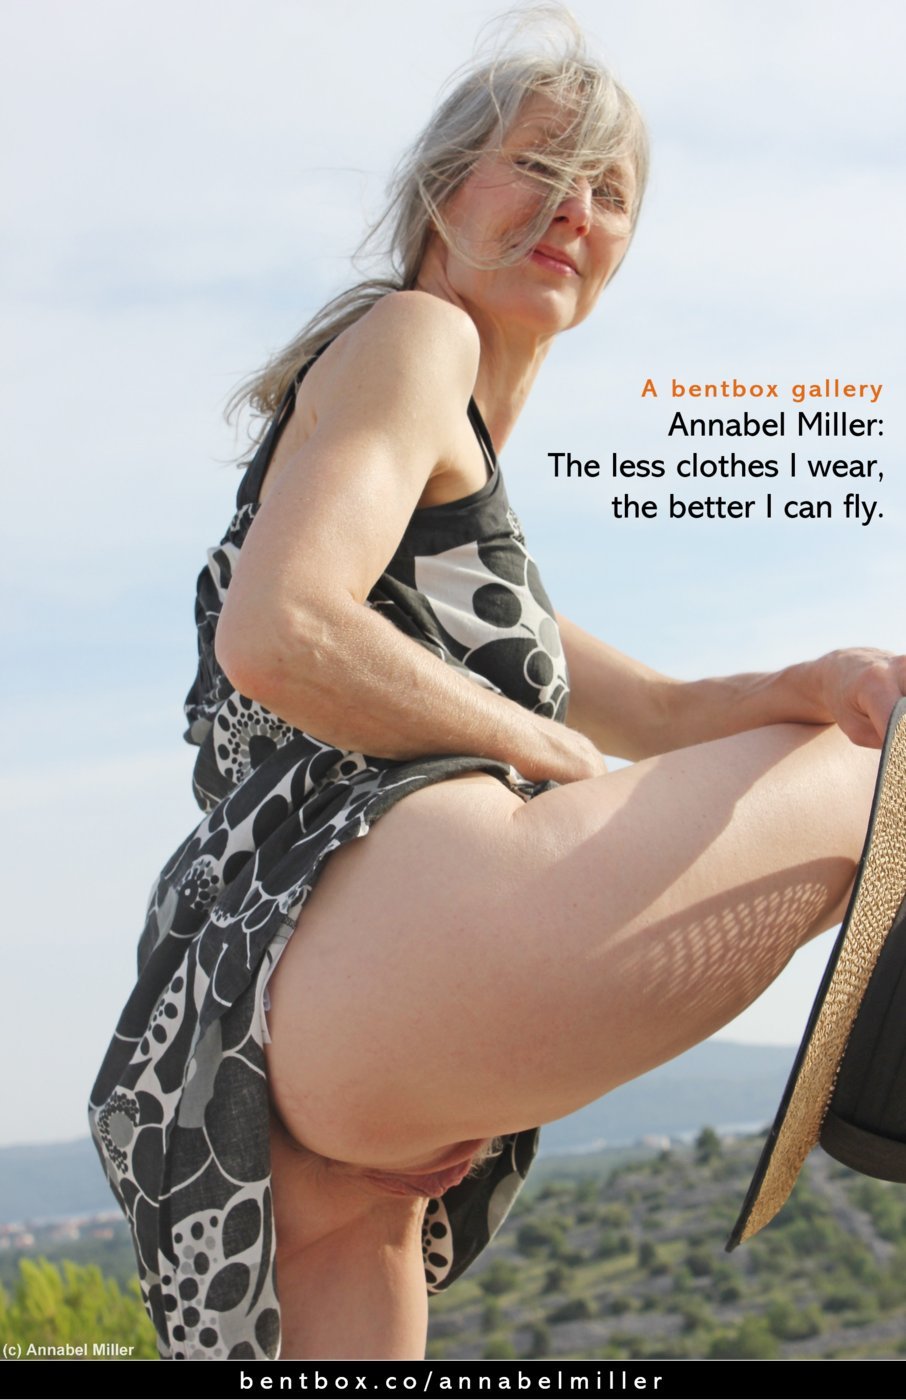 Experience Pure Bliss with Annabel Miller's Scintillating Milf Pics